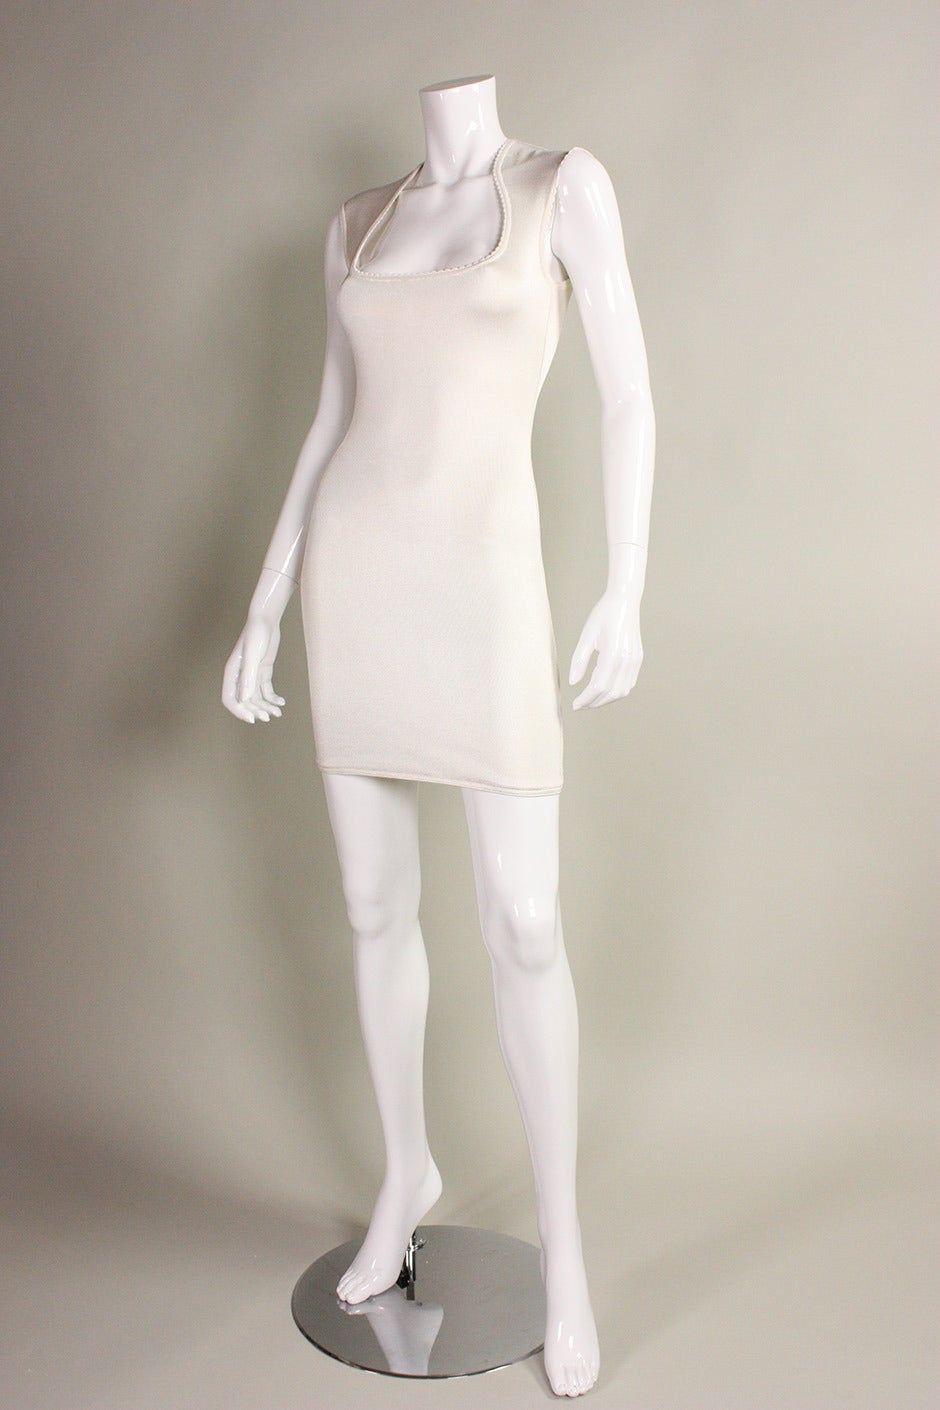 1990's Alaia dress is made of his signature body-con jersey in white.  Scoop neck with picot trim.  Center back invisible zipper.  Unlined except for in bust.

Labeled size Small, but would likely accommodate an Extra Small as well.